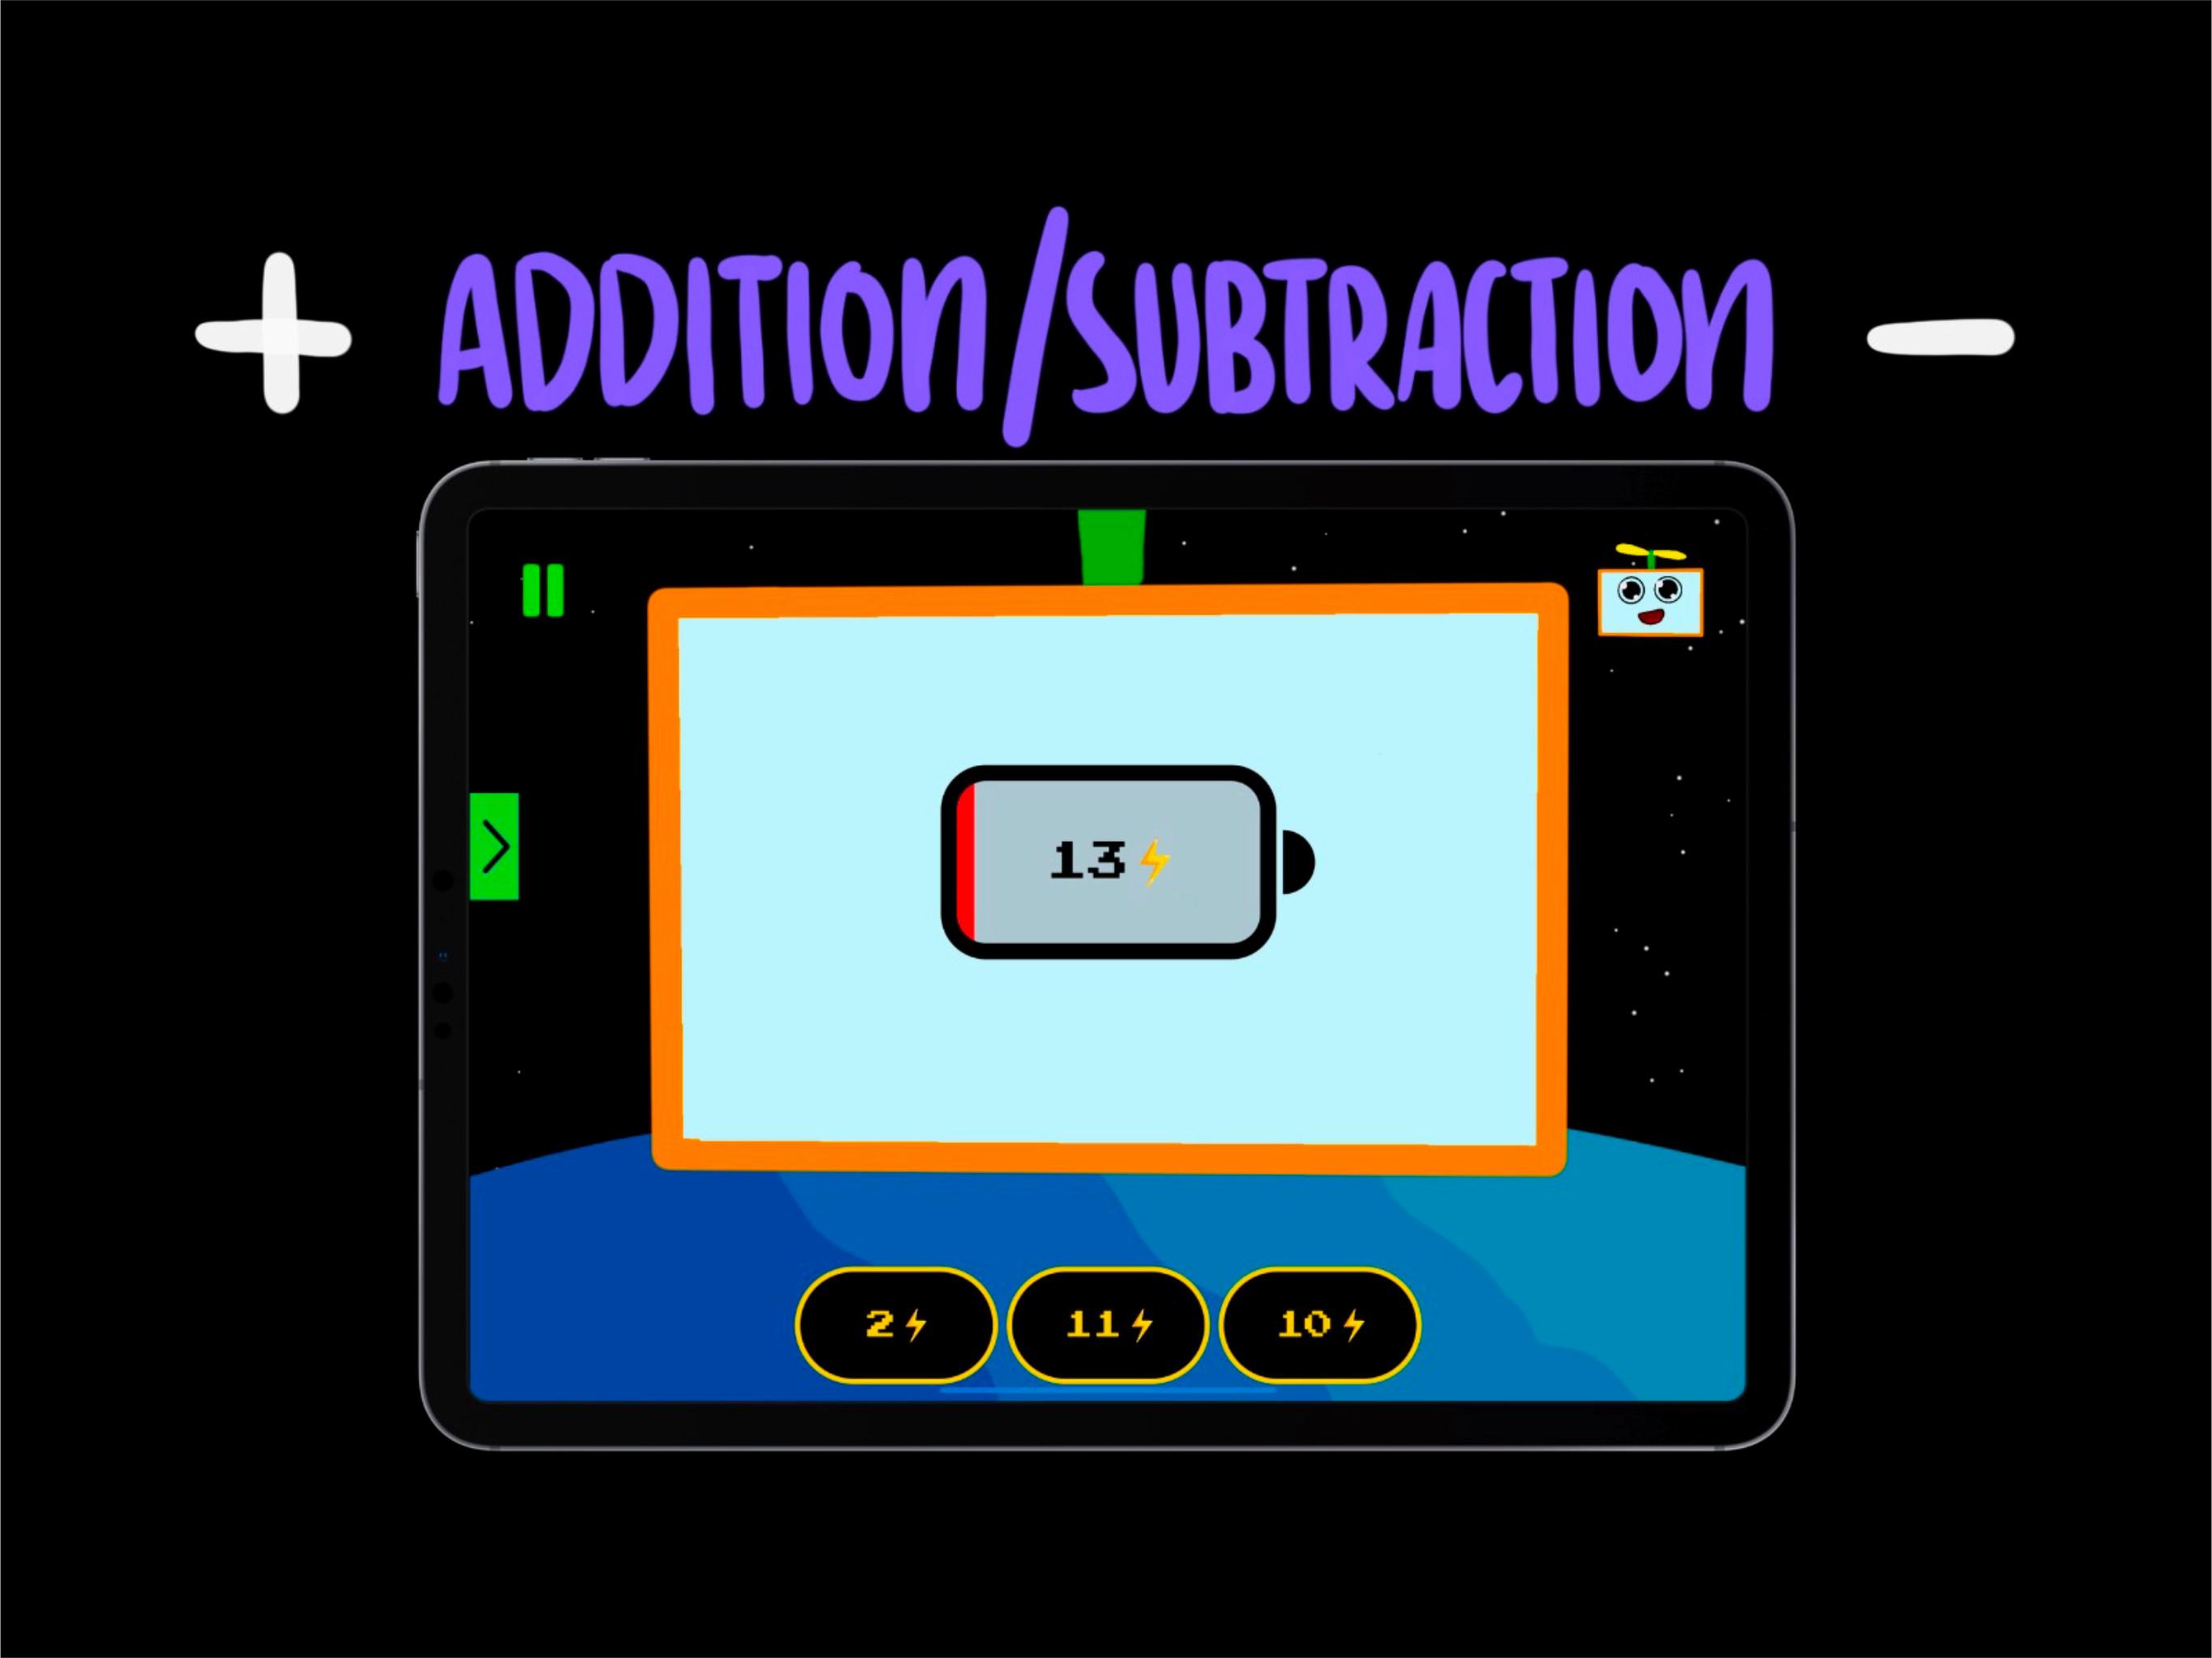 addition / subtraction image